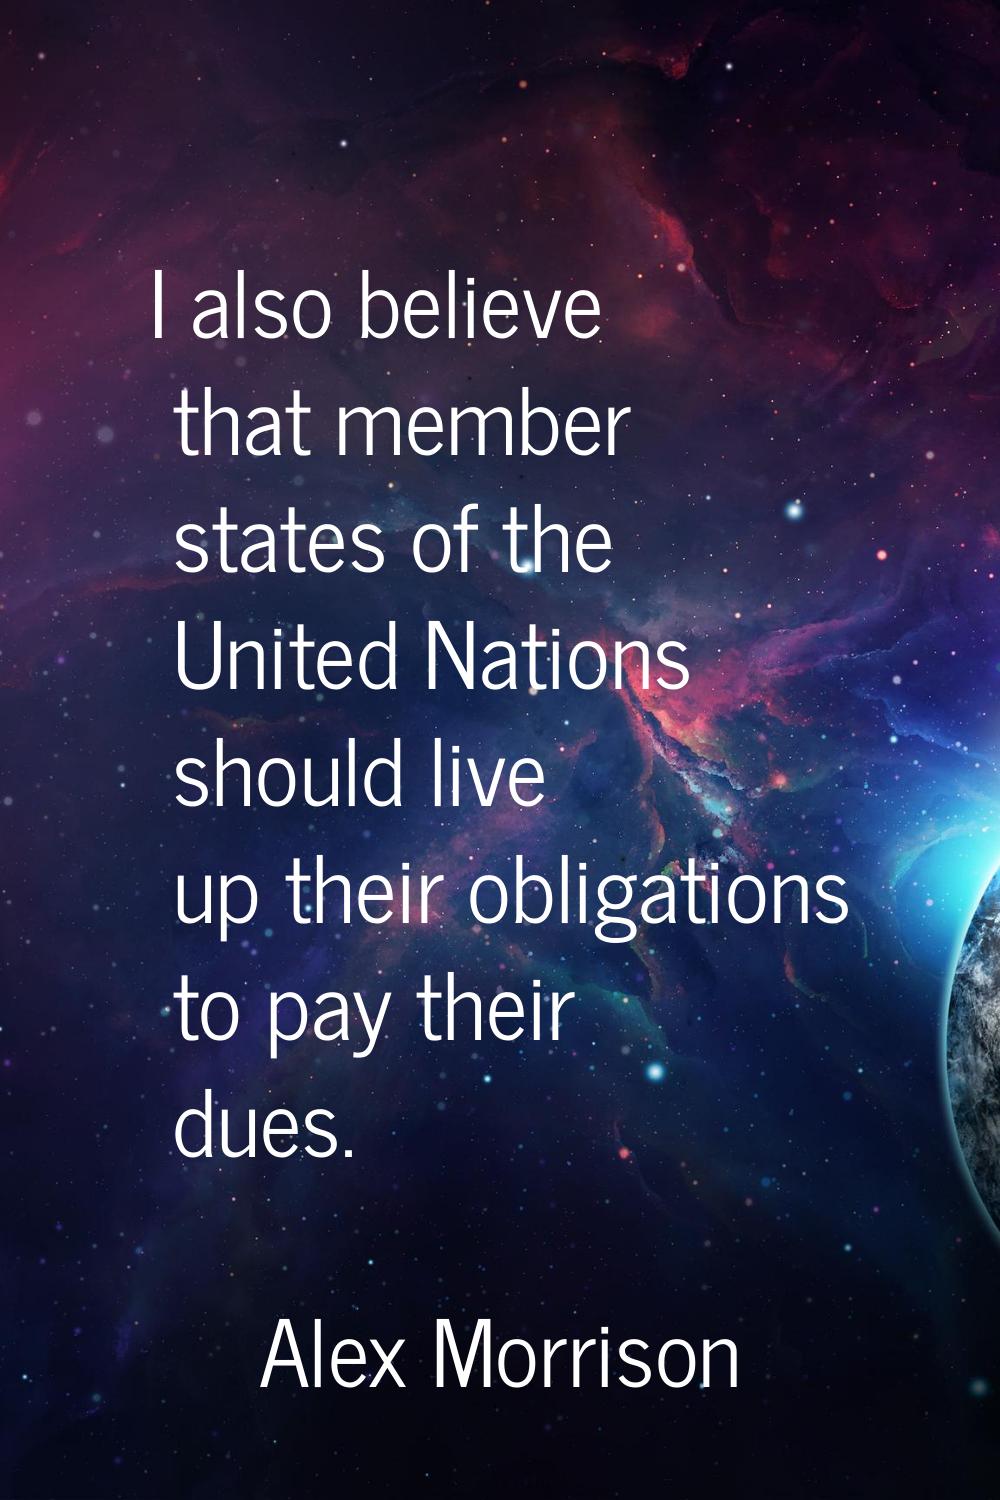 I also believe that member states of the United Nations should live up their obligations to pay the